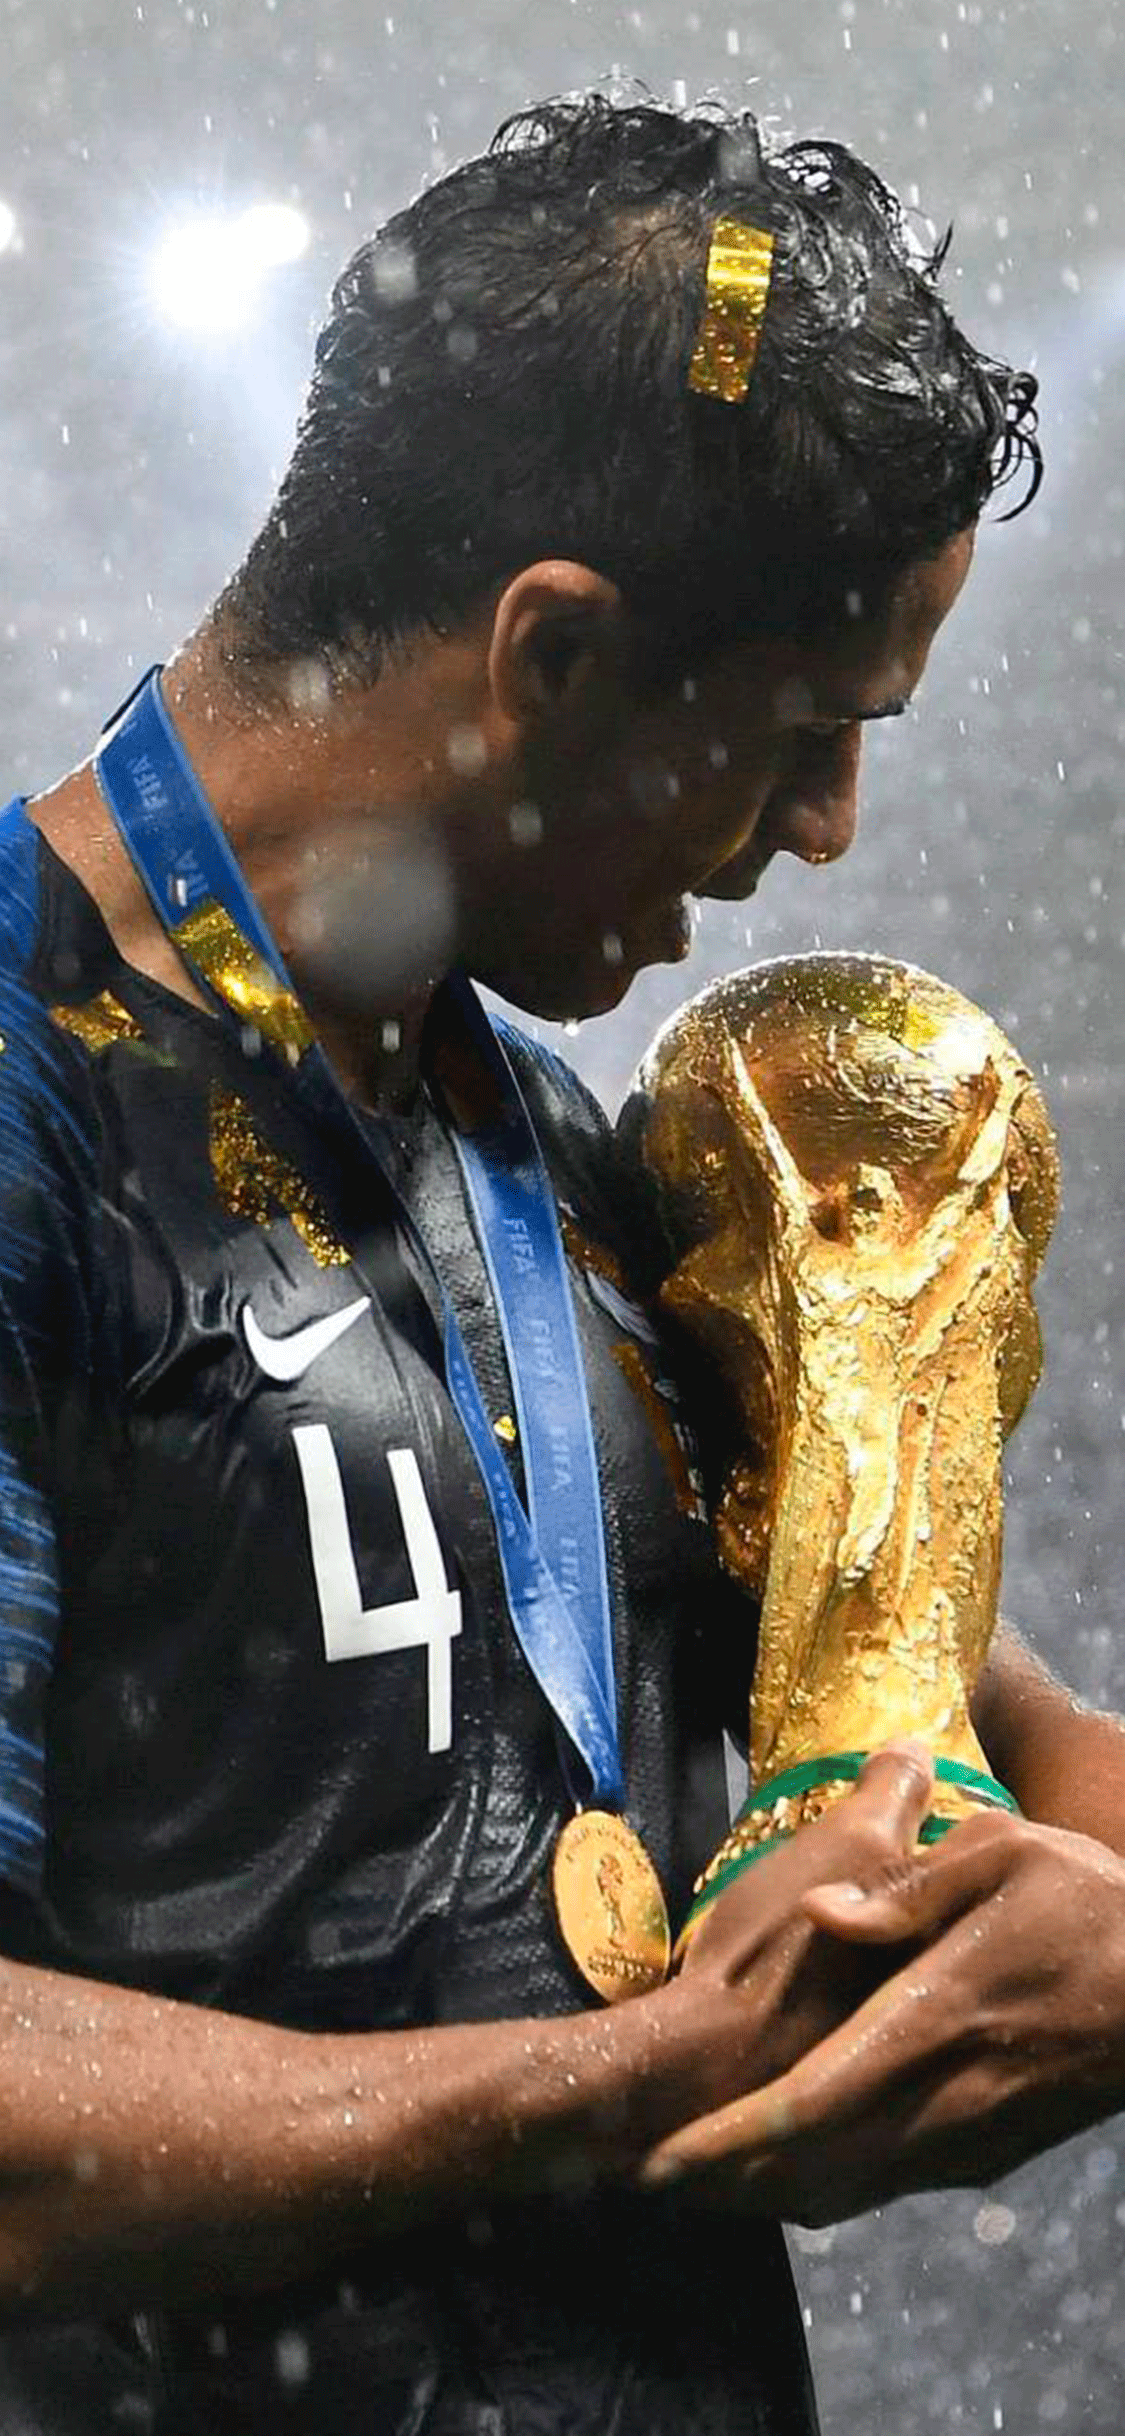 Fifa World Cup Final 2018 Wallpaper for iPhone X, 6